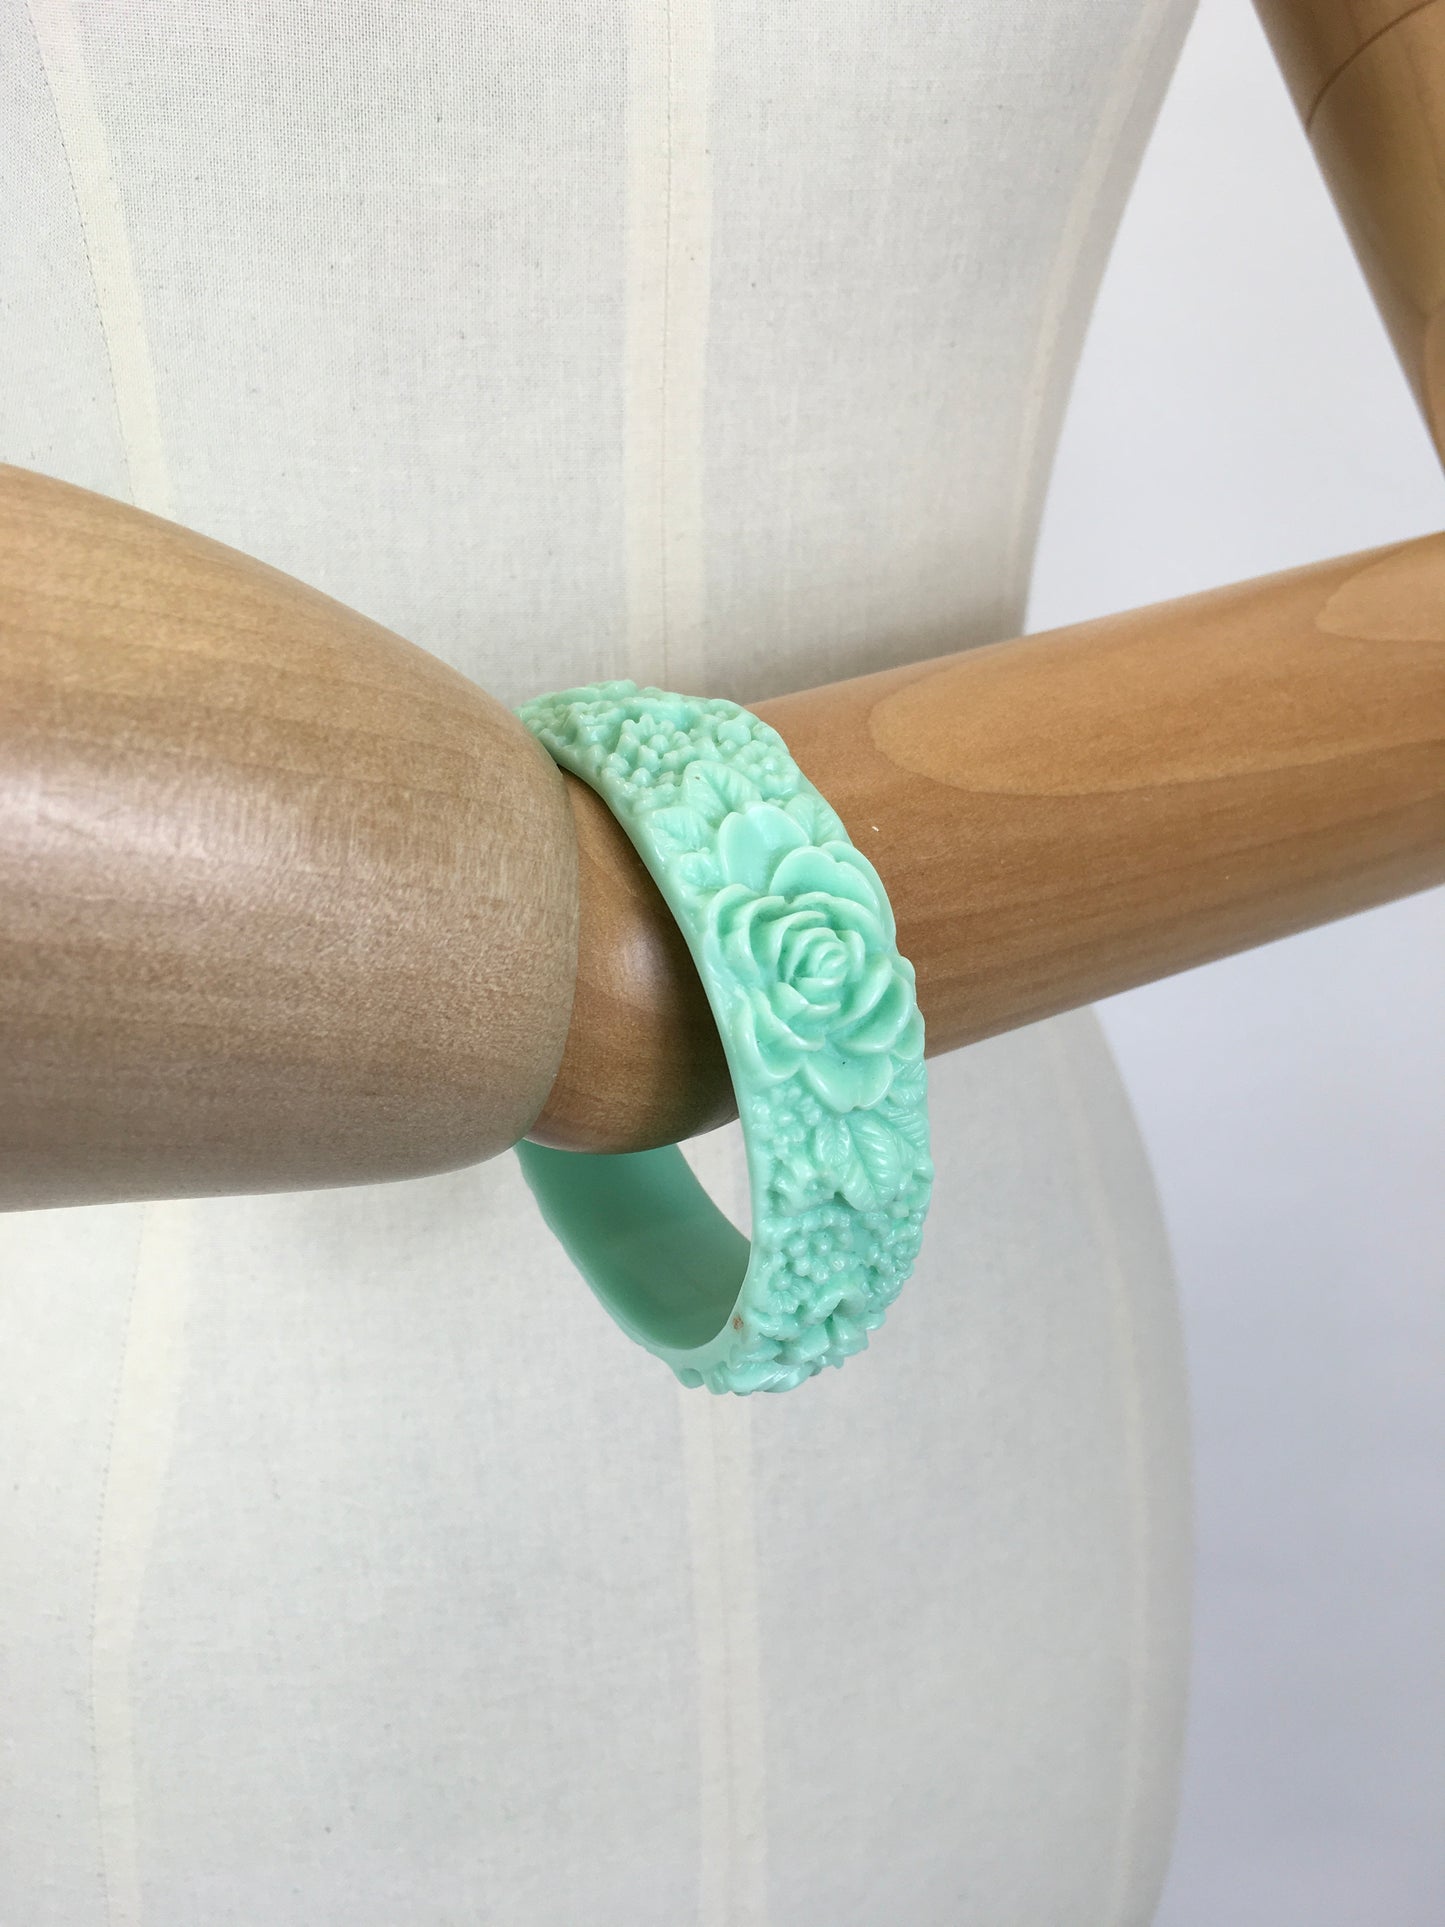 Original 1950’s FABULOUS Pastel Green Plastic Bangle - With Carved Floral Detailing